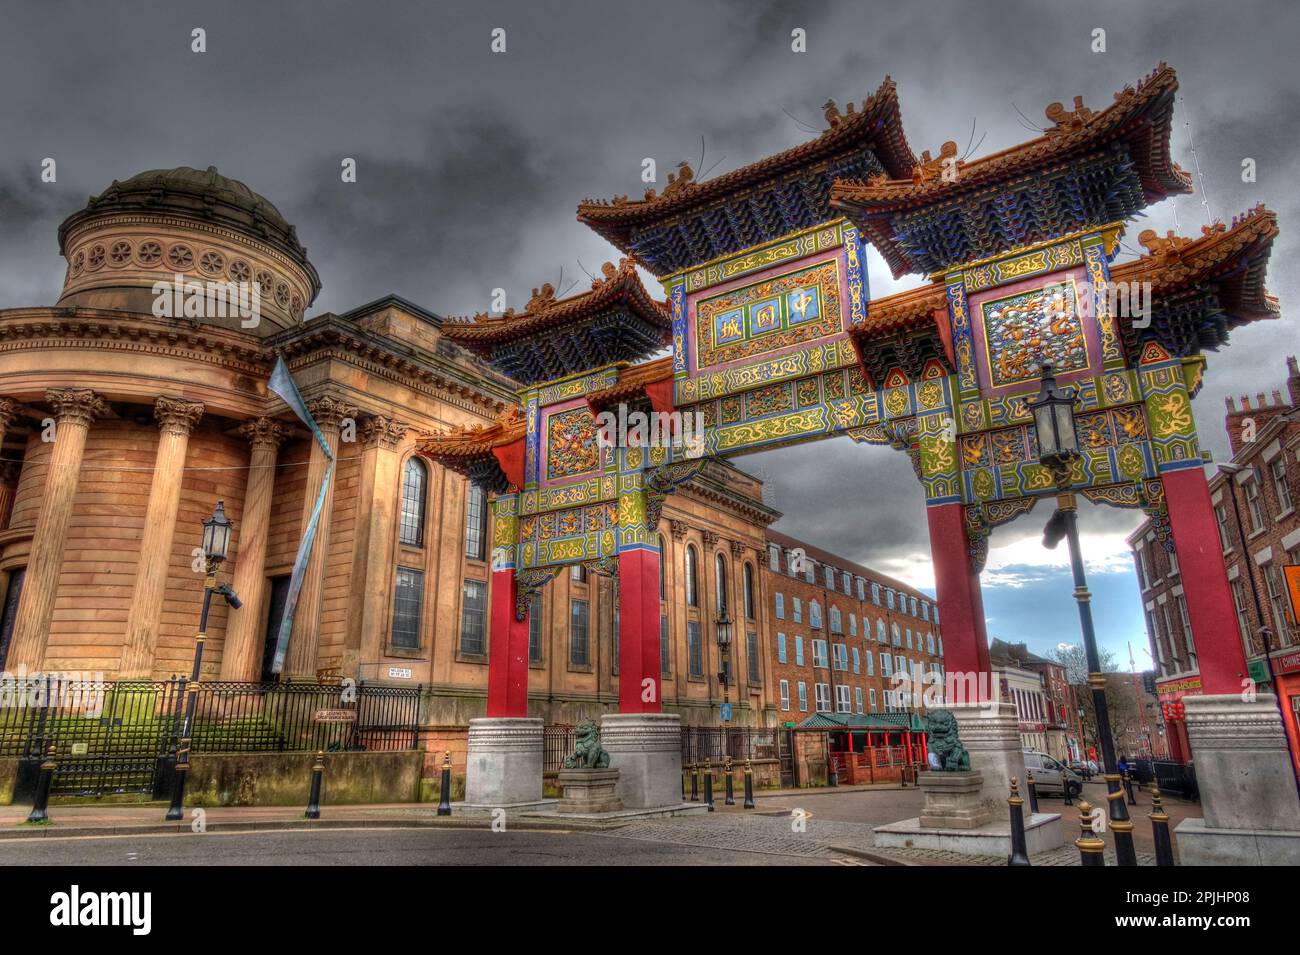 The paifang Chinatown Gate, Nelson Street, Liverpool, Merseyside, England, UK, L1 5DN Stock Photo